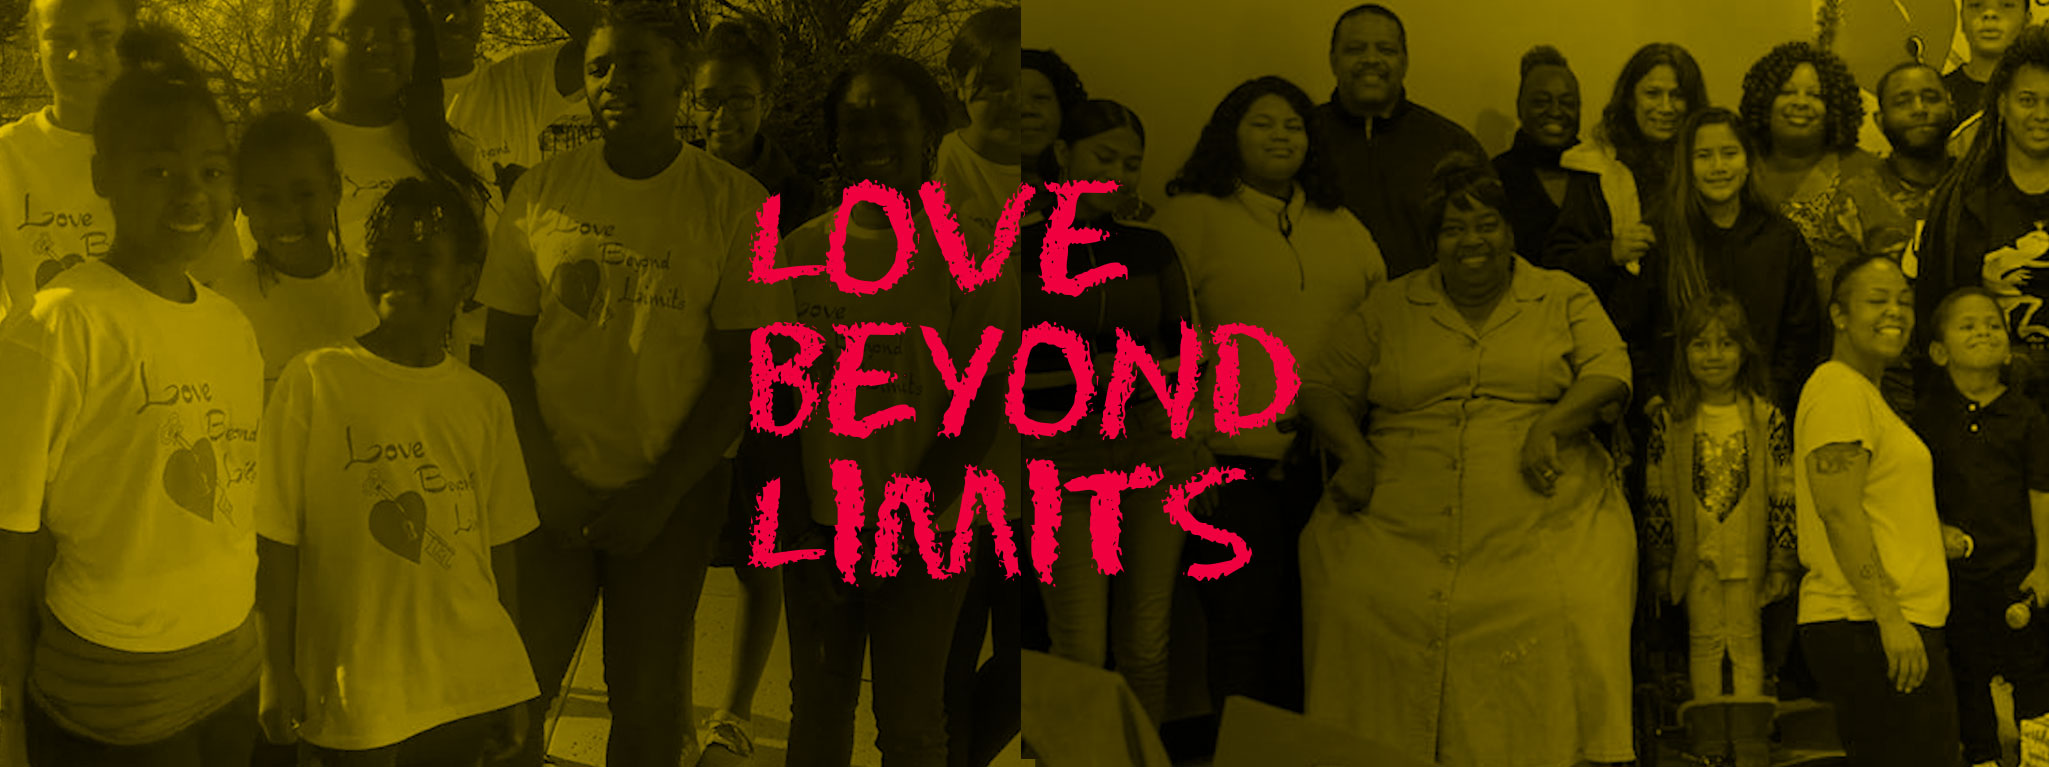 Featured image for Pushing Love Beyond Limits